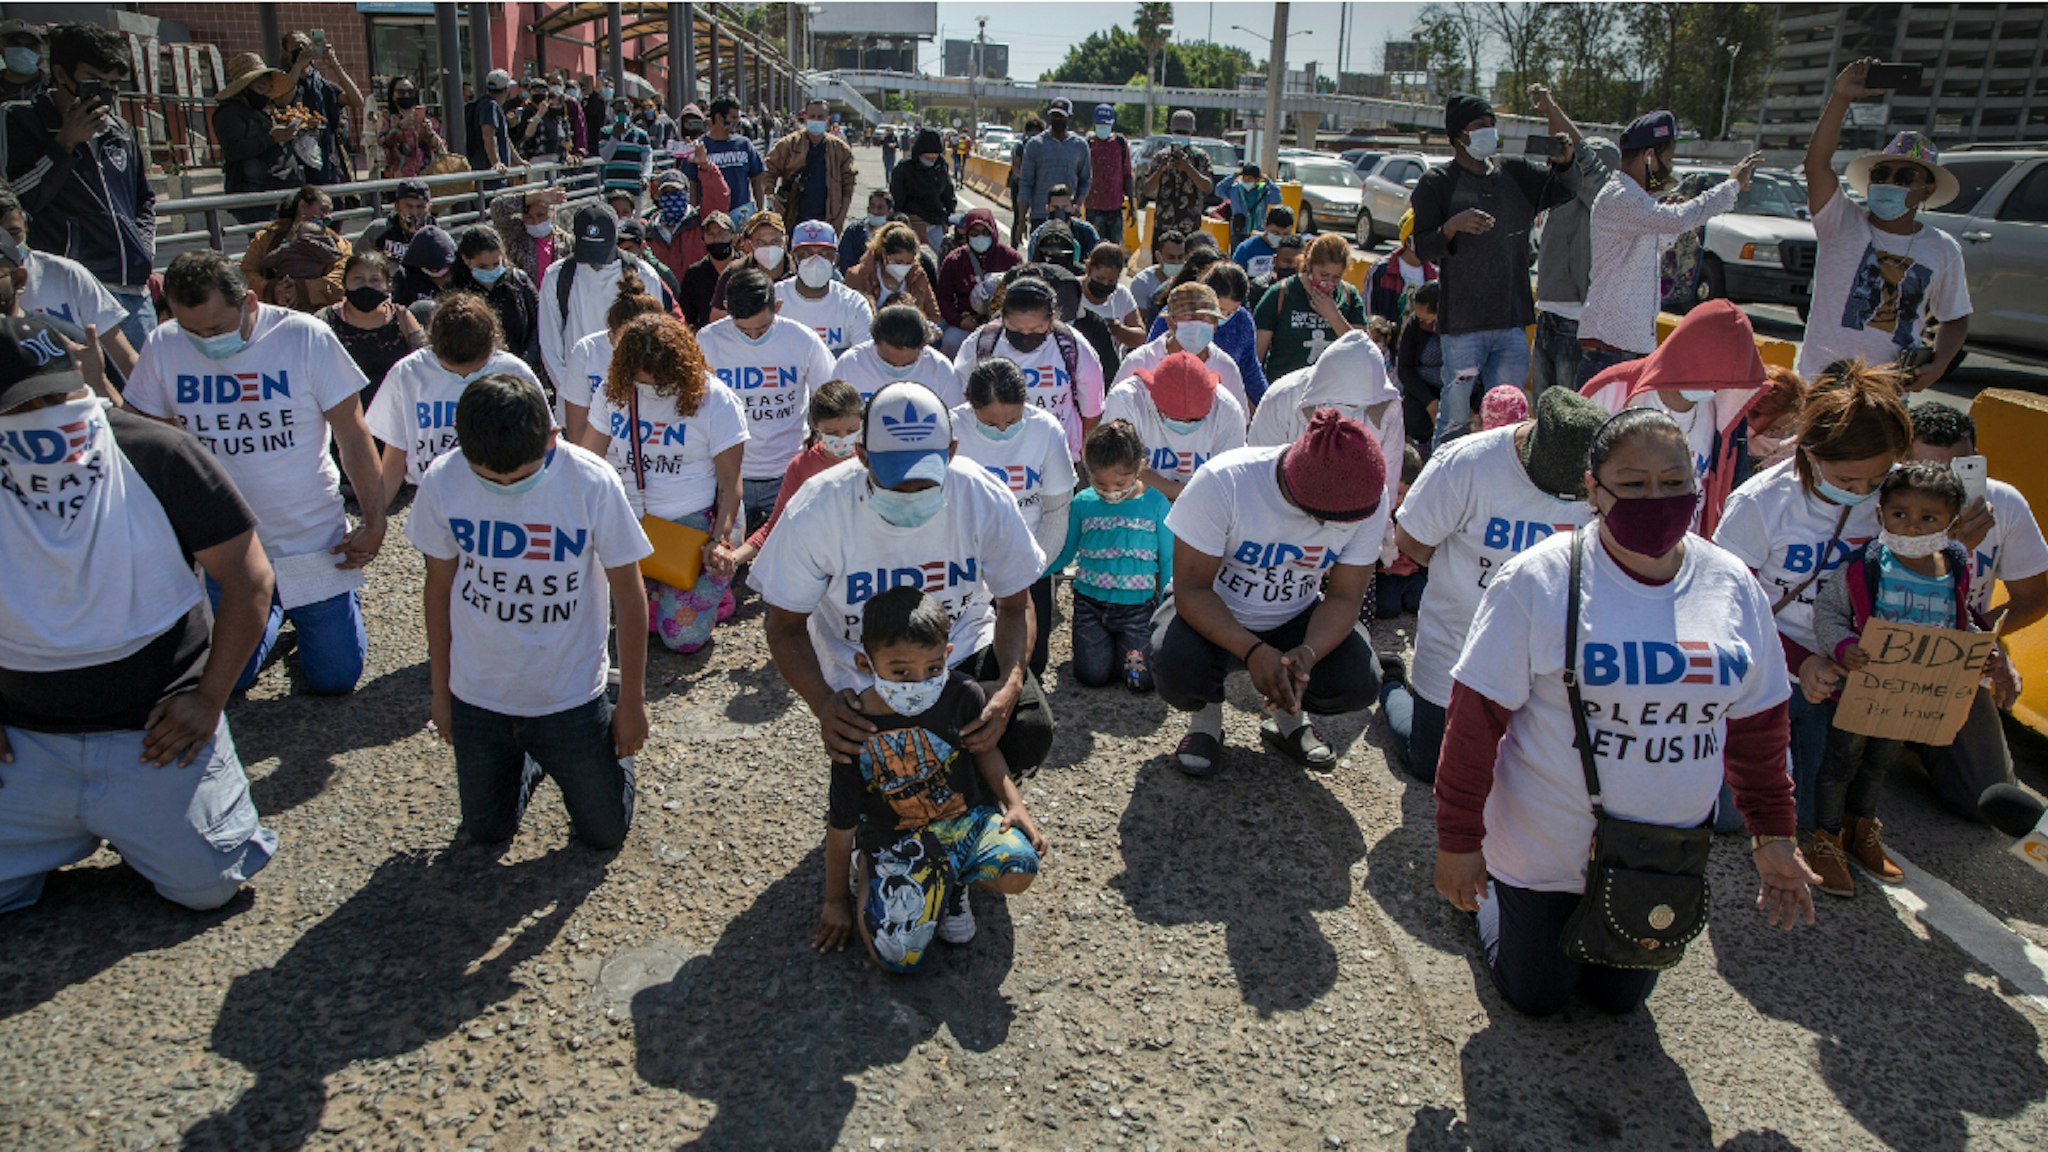 dpatop - 02 March 2021, Mexico, San Ysidro: A group of migrants wearing T-shirts that read "Biden, please let us in" kneel and pray at the border crossing.